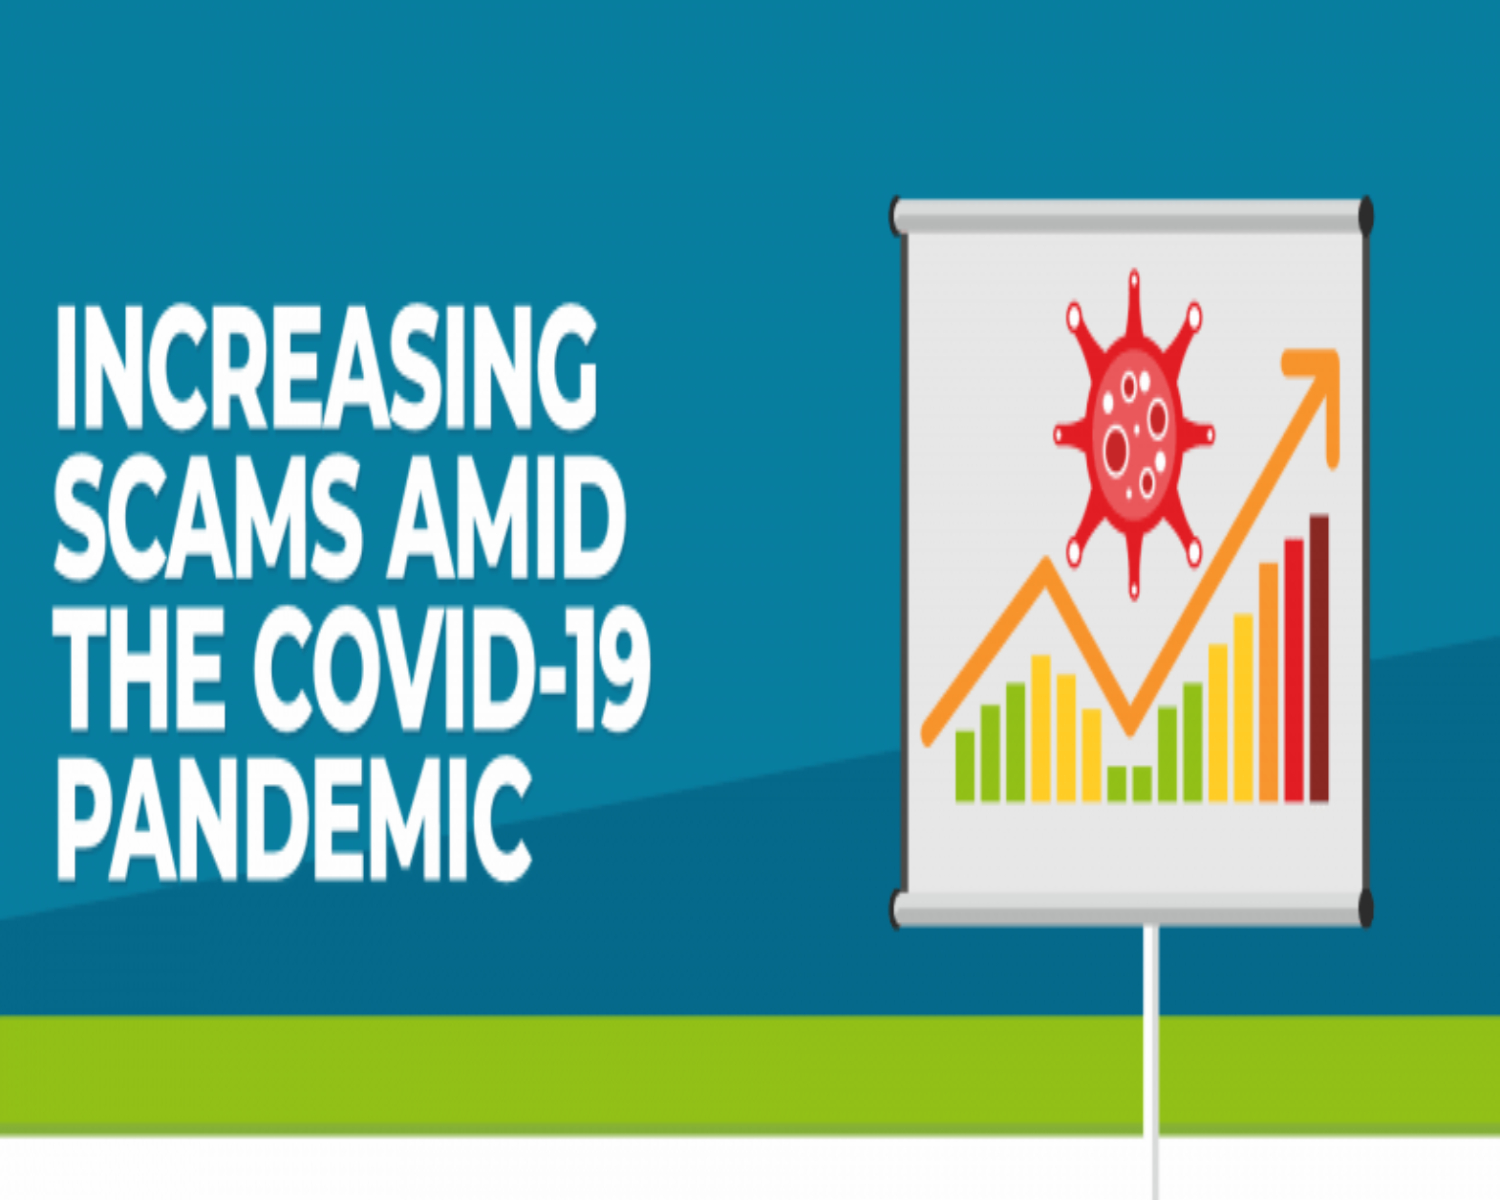 Stay alert of common COVID-19 scams